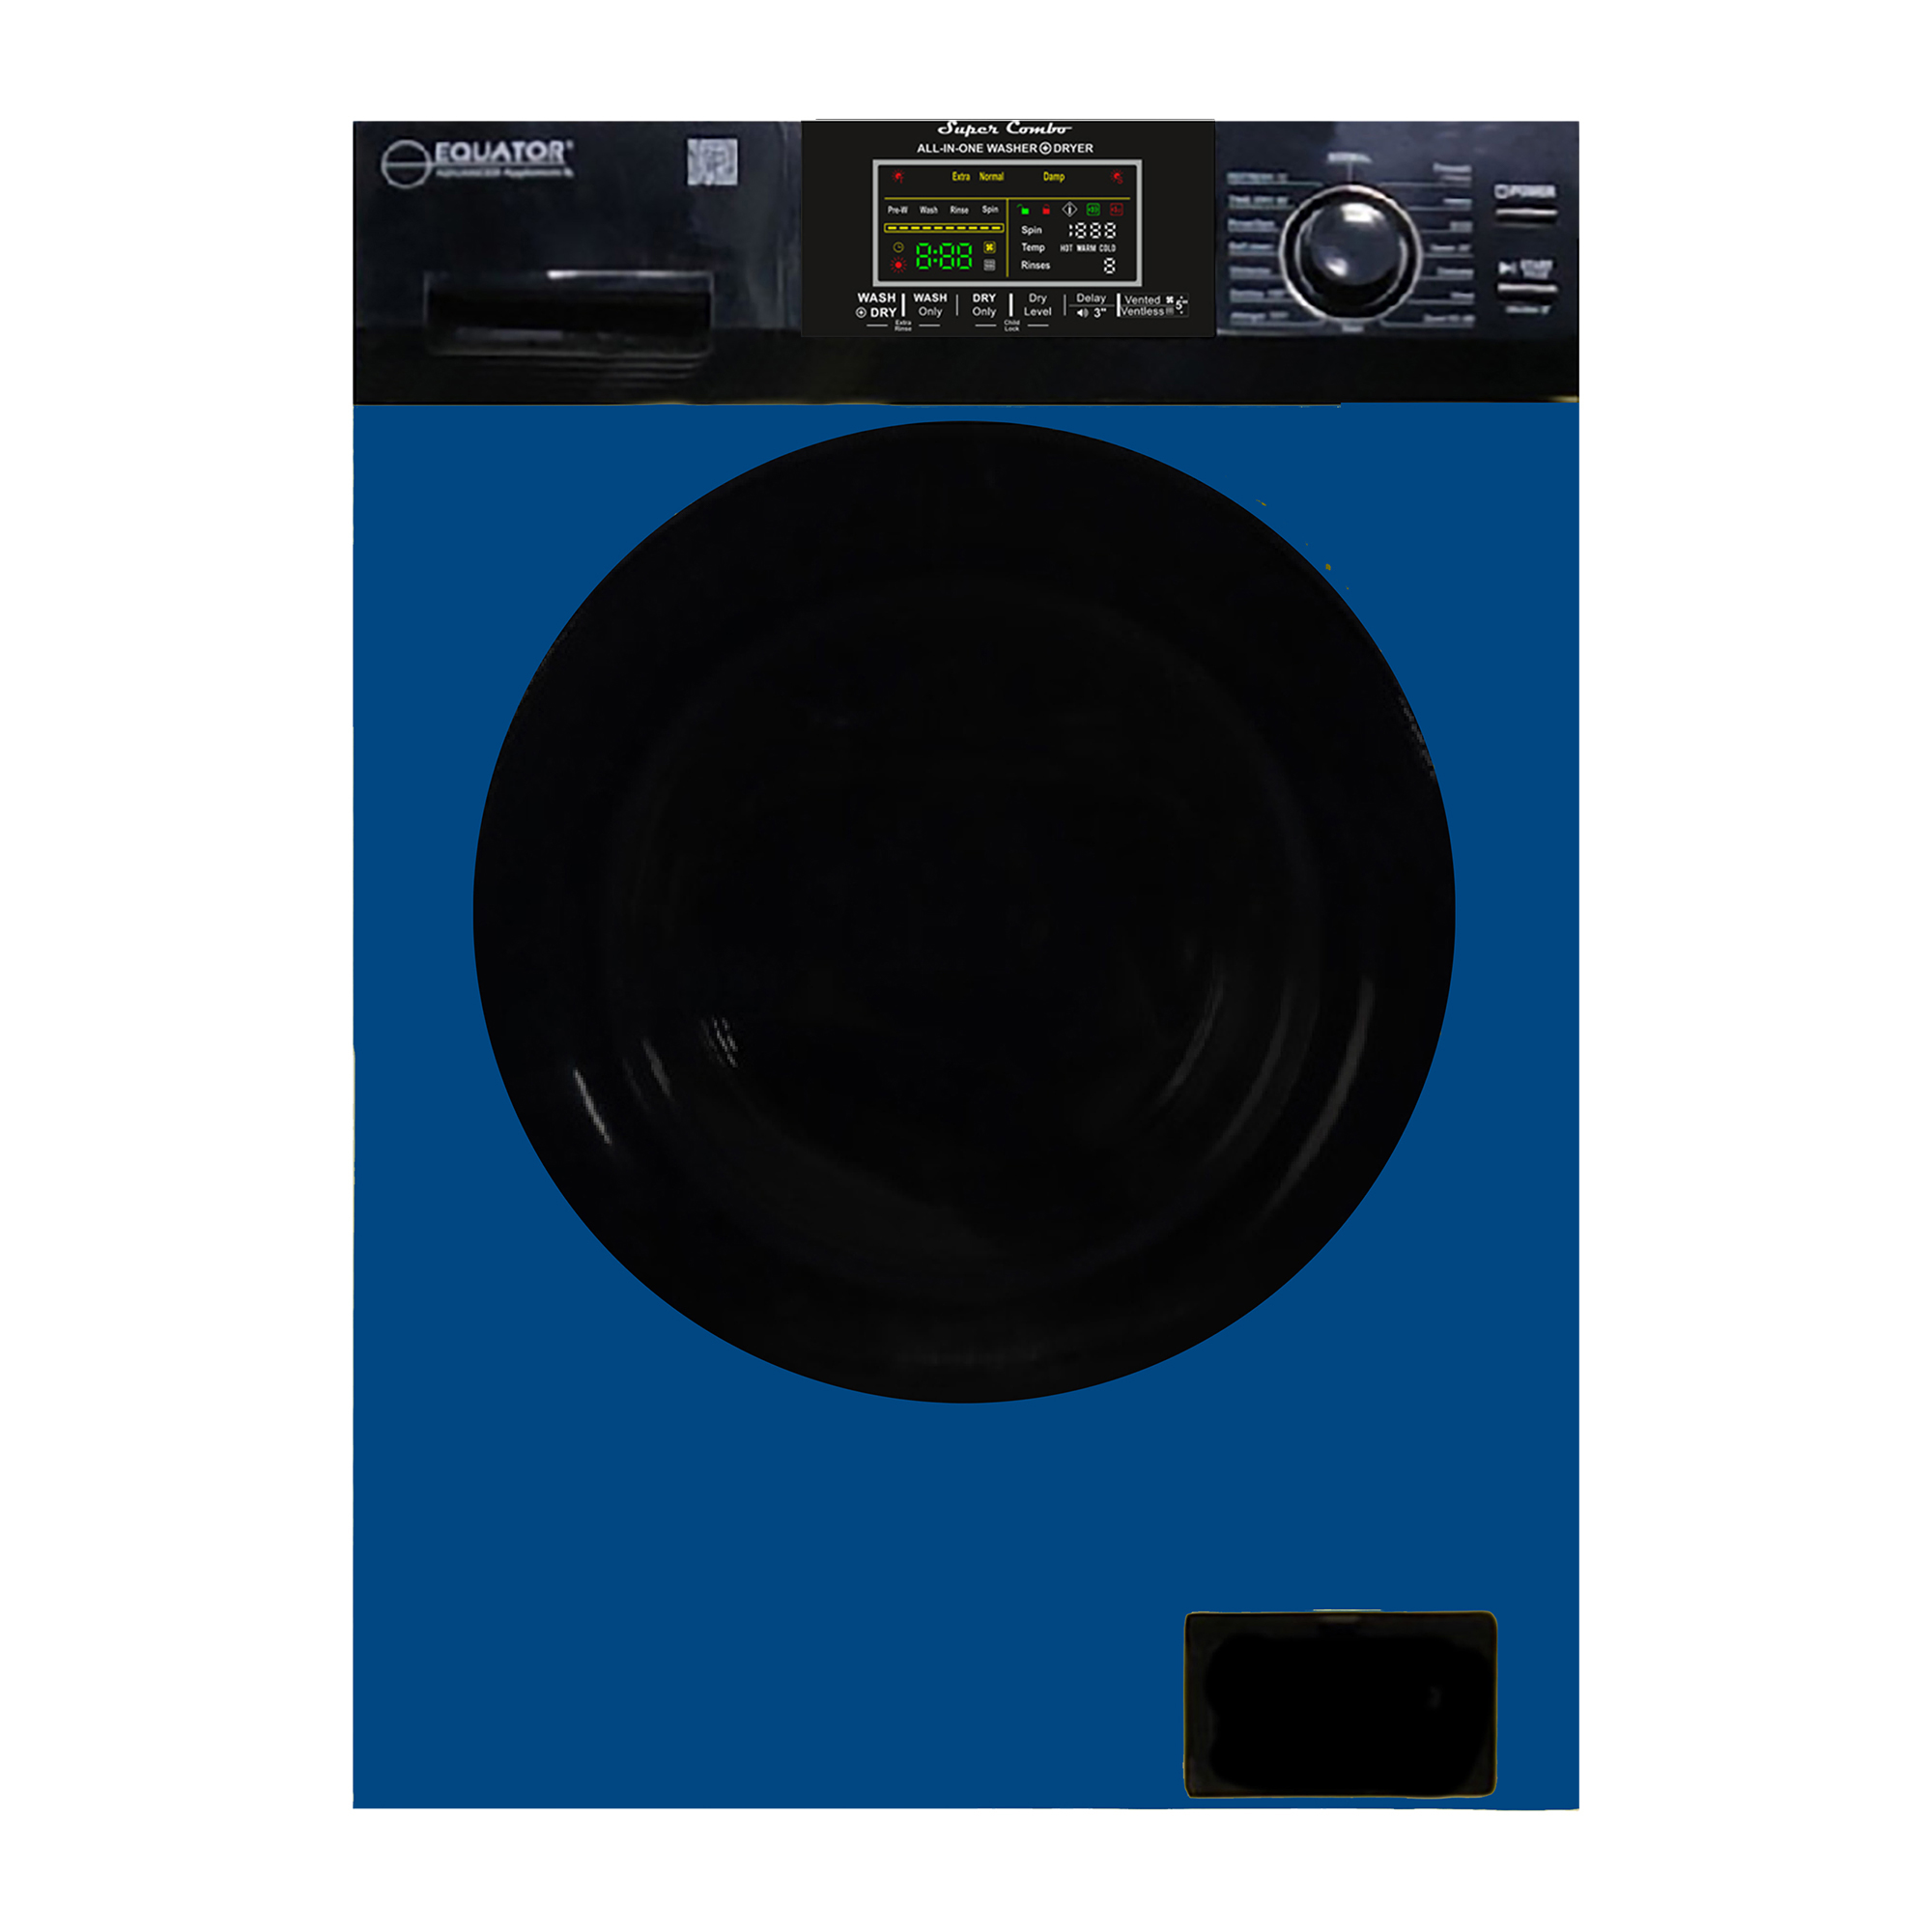 Equator (Ver3)Compact  1.9 cf Combo Washer Vented/Ventless Dry-Color Coded Display Blue/Black